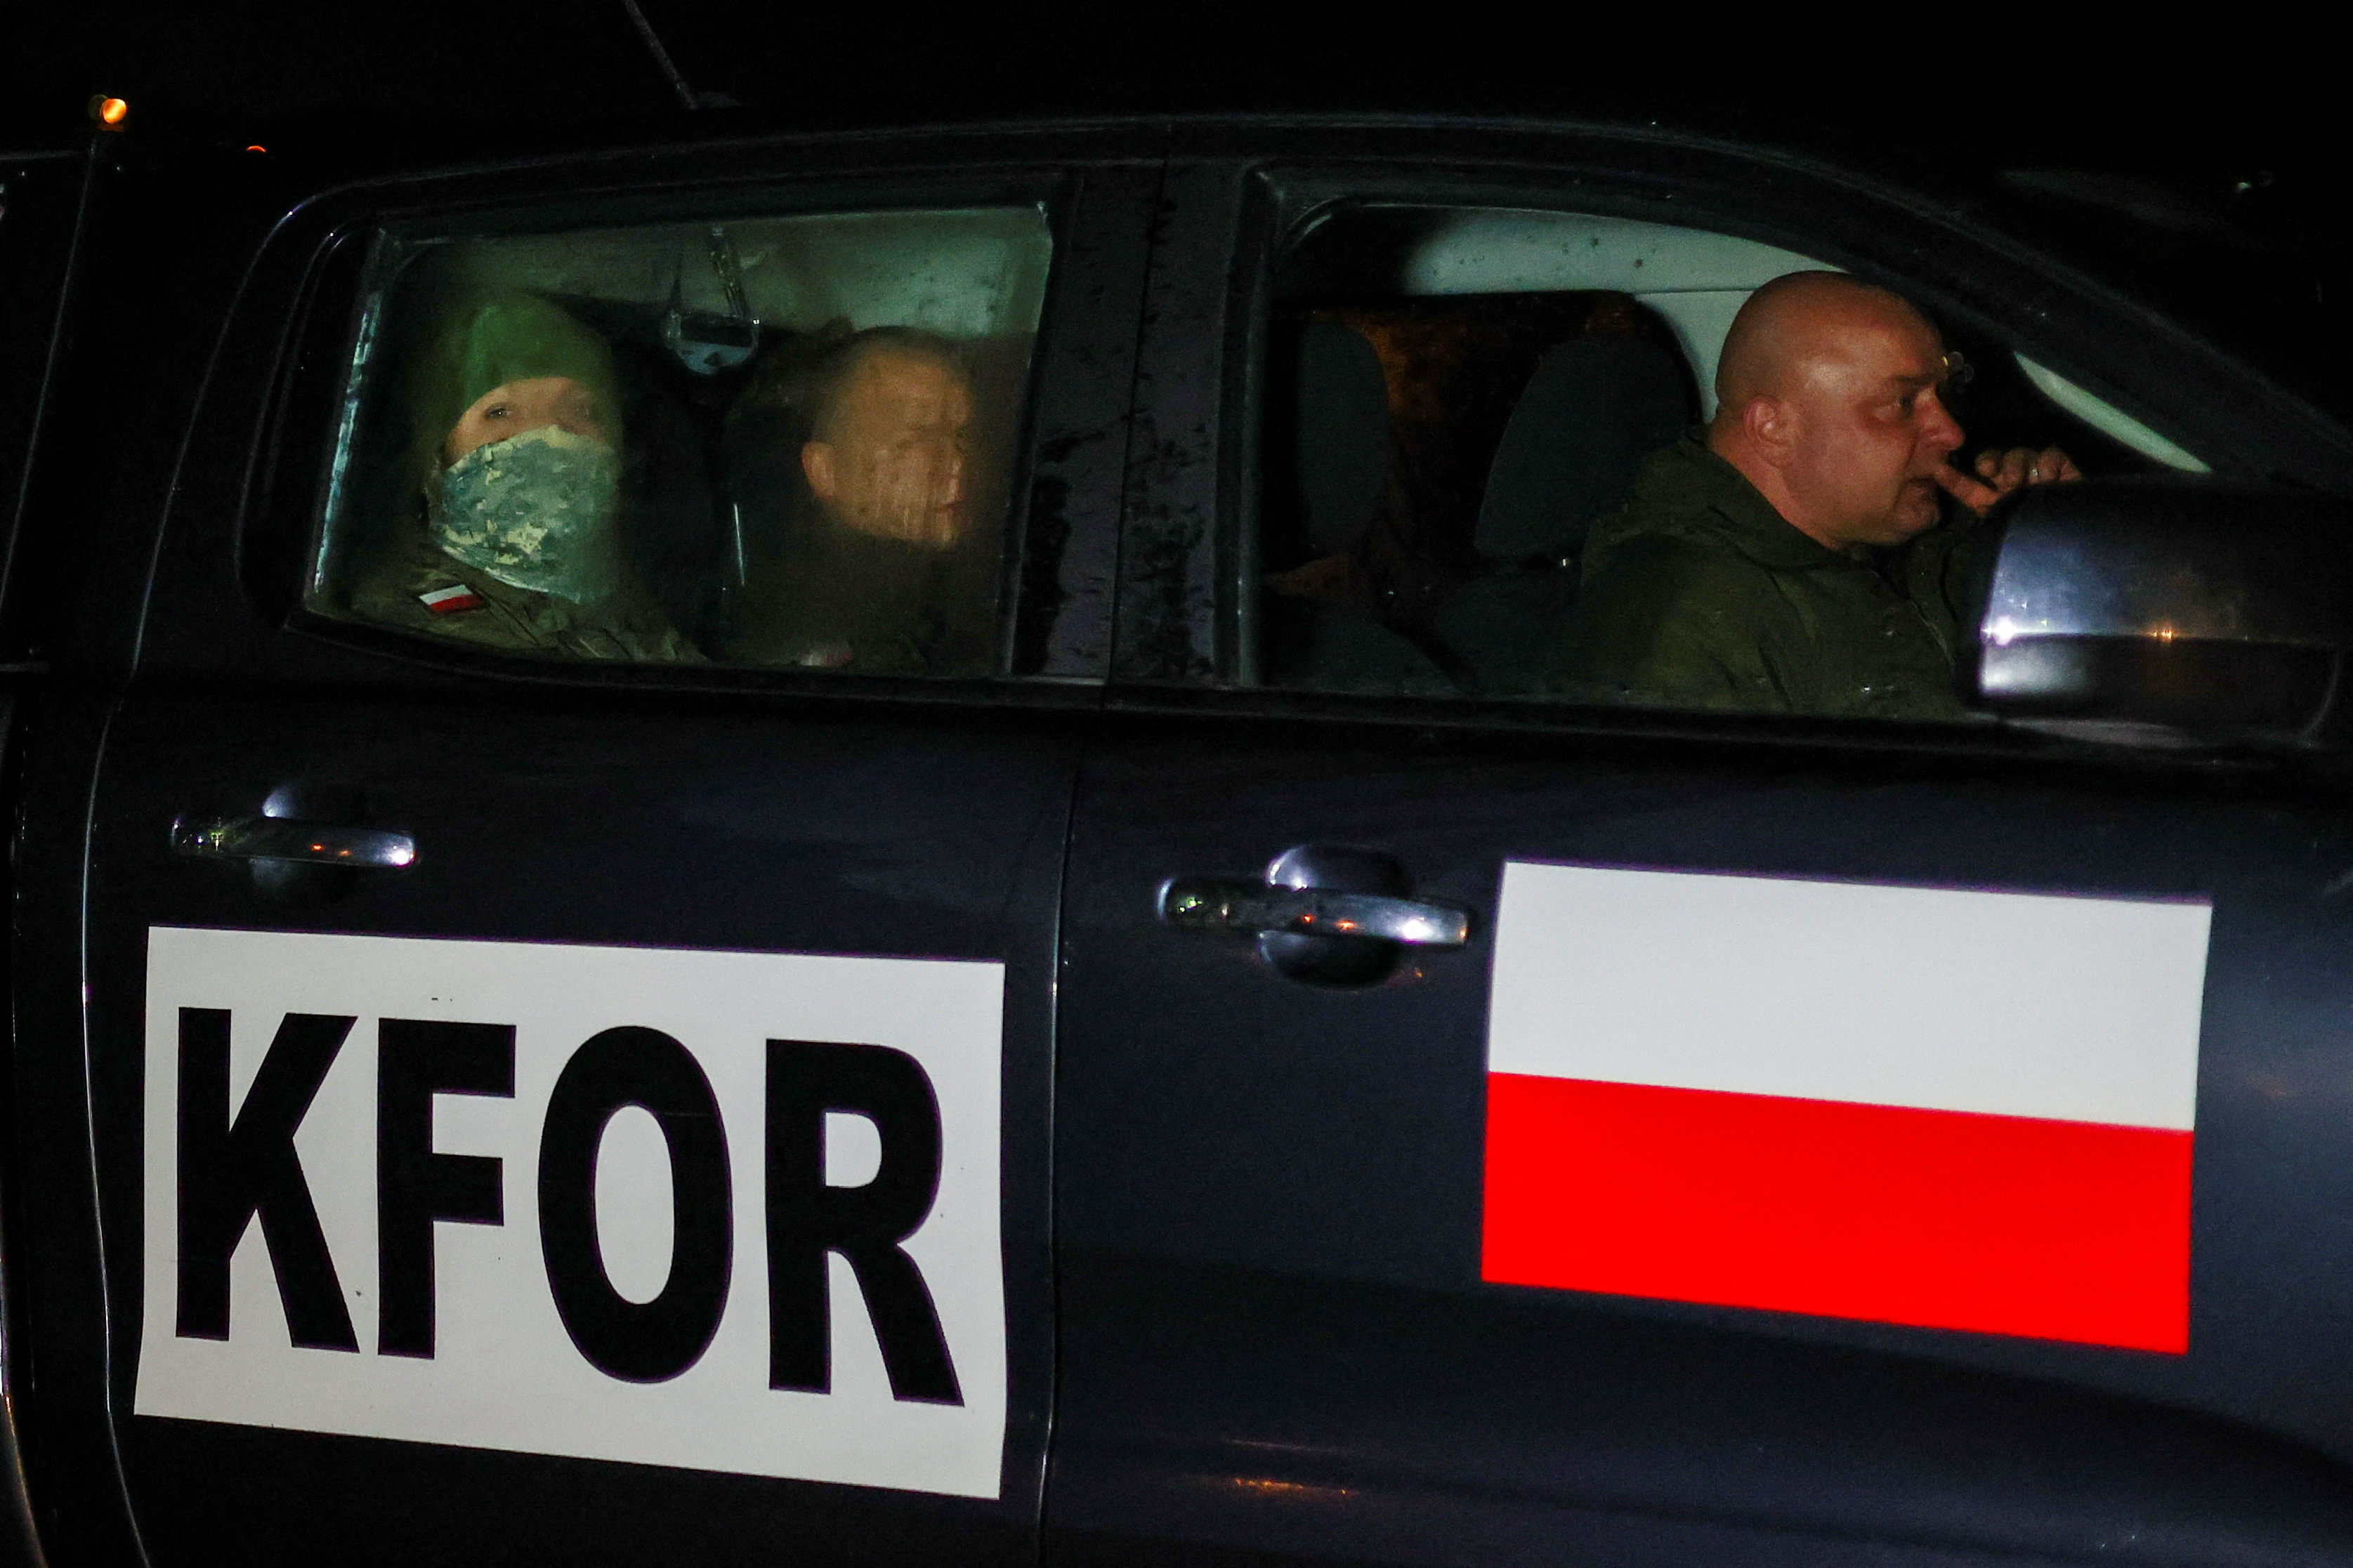 Members of the Polish Armed Forces, part of NATO peacekeepers mission in Kosovo, stay in a vehicle near the barricade in the northern part of the ethnically-divided town of Mitrovica